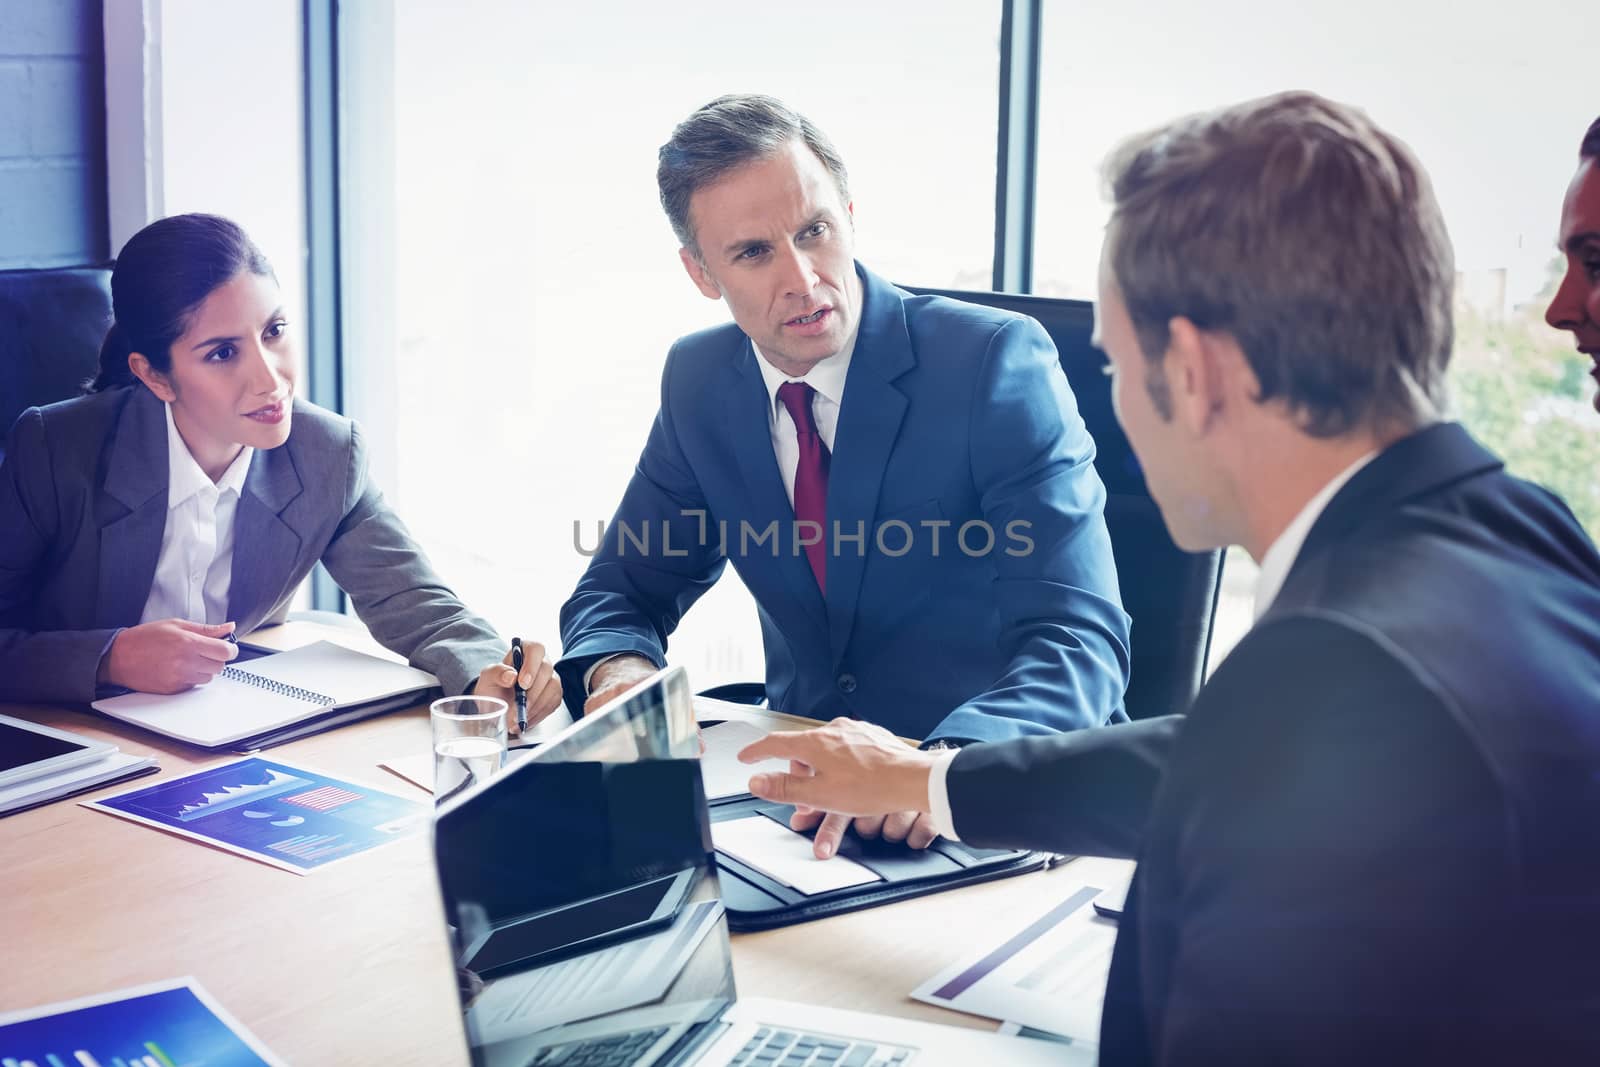 Business people interacting in conference room during meeting